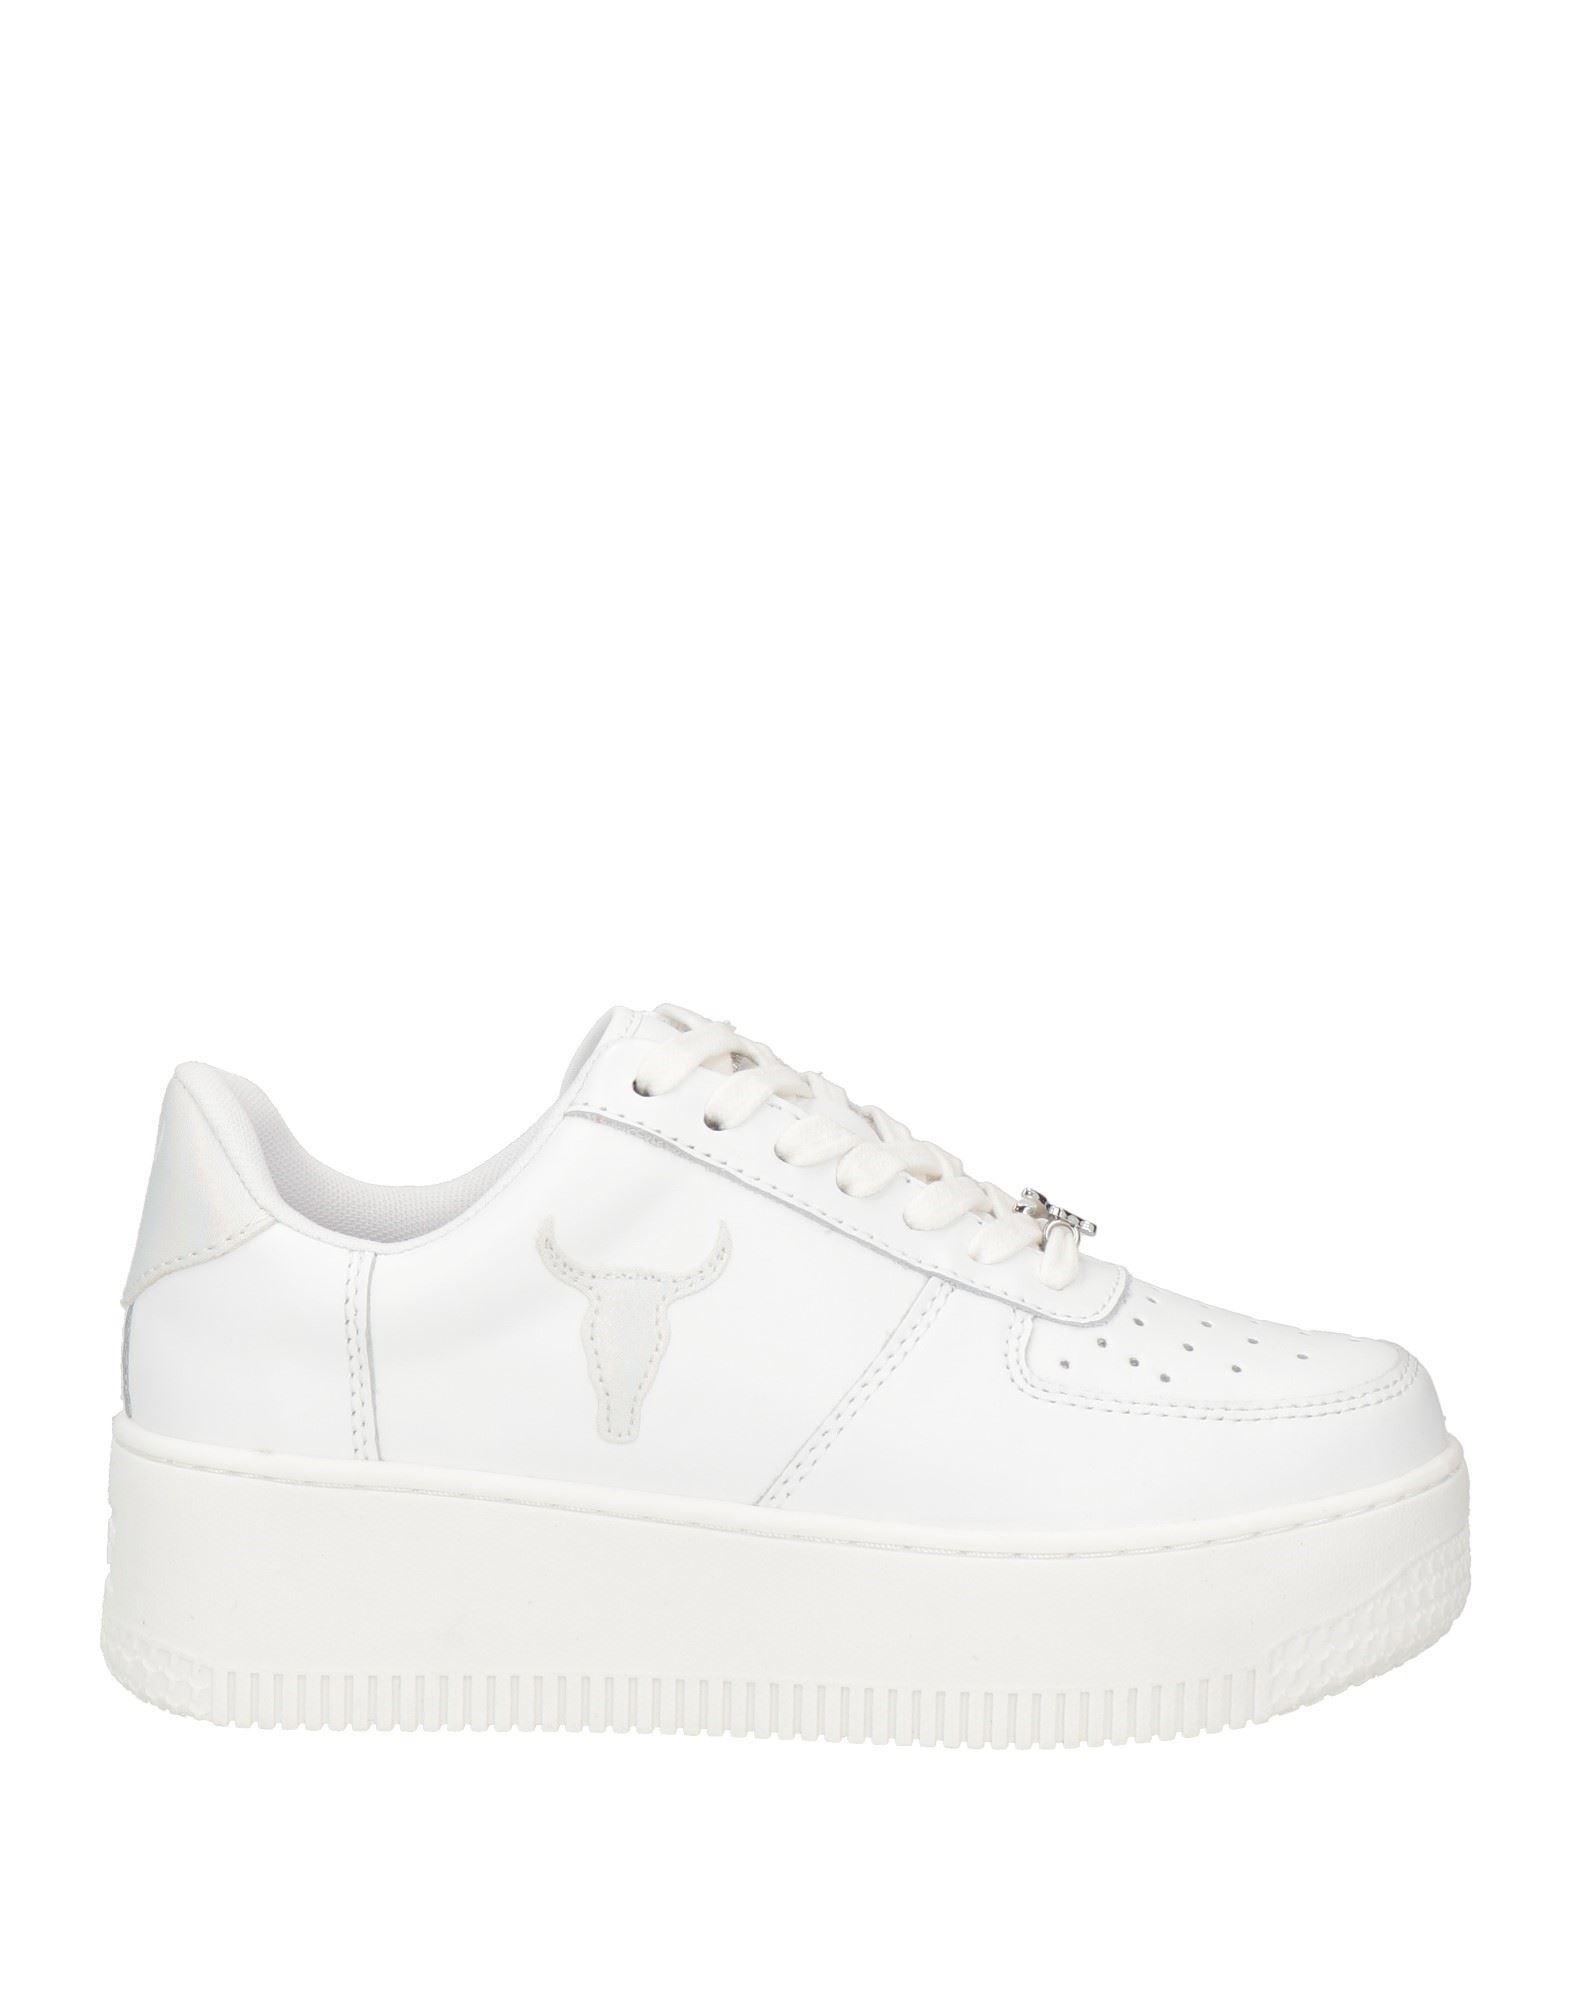 Windsor Smith Sneakers in White | Lyst